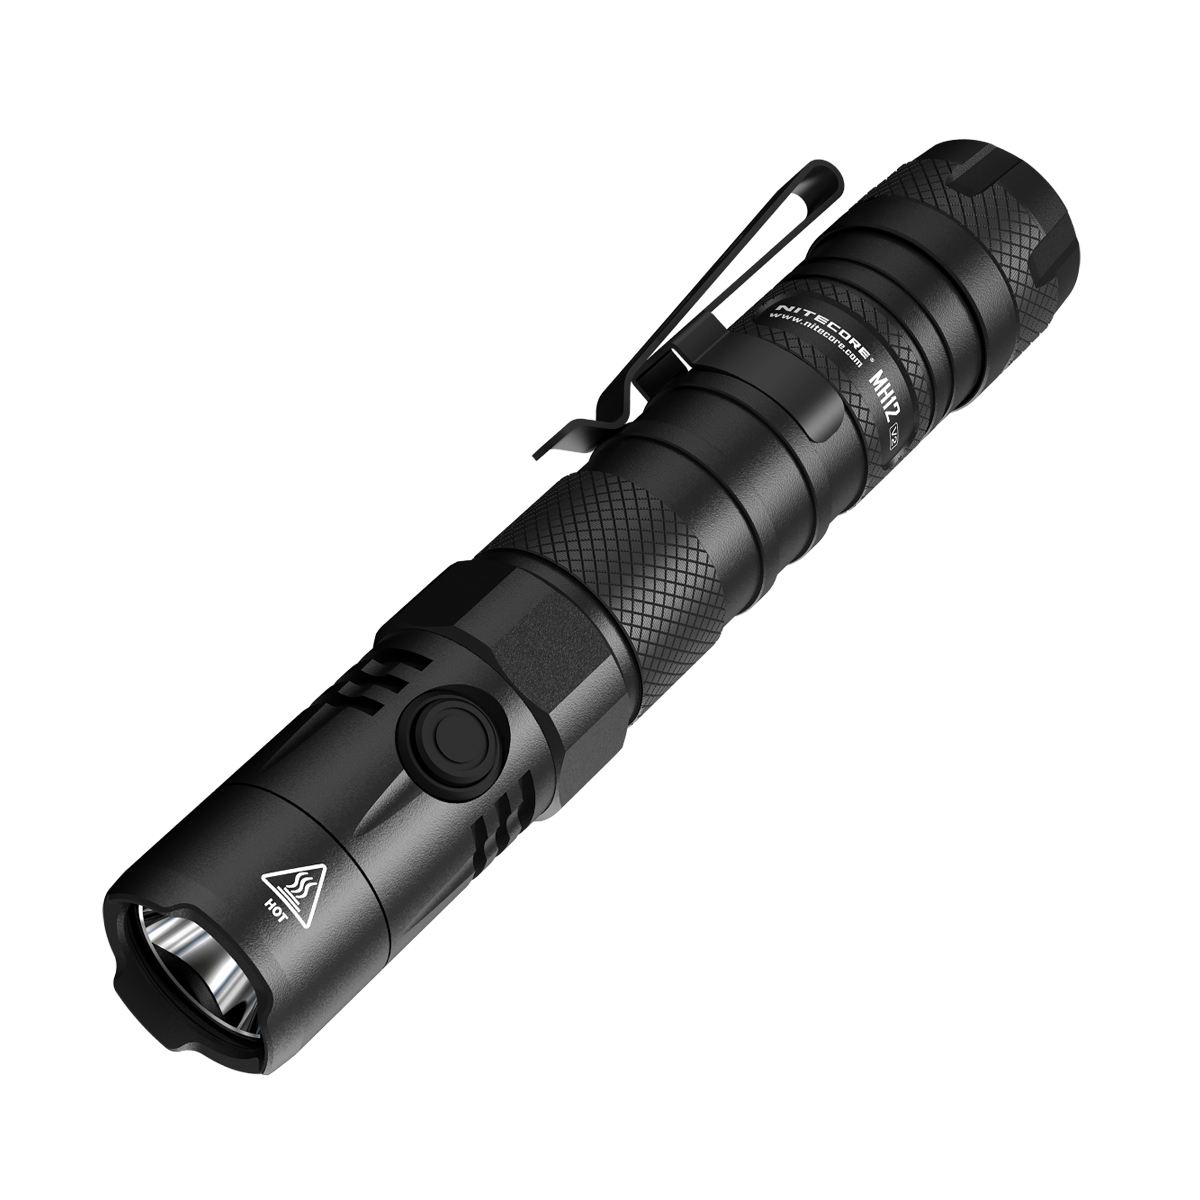 Nitecore MH12 1000 Lumens Rechargeable LED Flashlight Upgrade of P12 MH10 MH25 